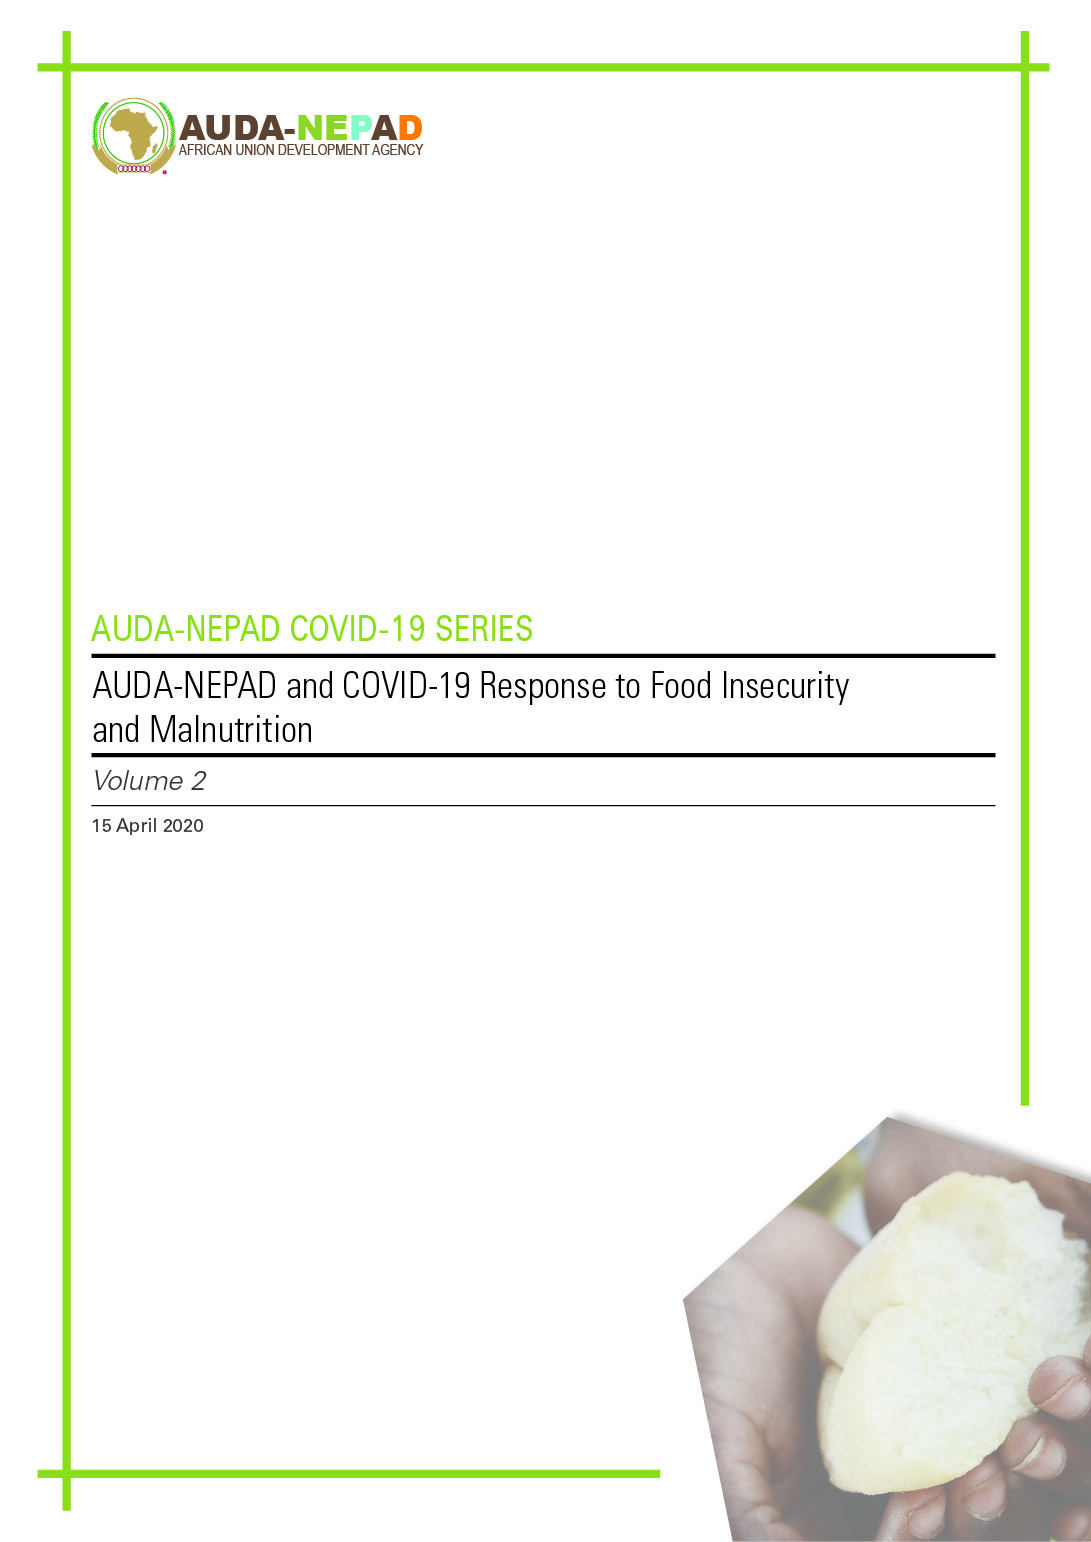 AUDA-NEPAD COVID-19 SERIES: Volume 2: AUDA-NEPAD and COVID-19 Response to Food Insecurity and Malnutrition